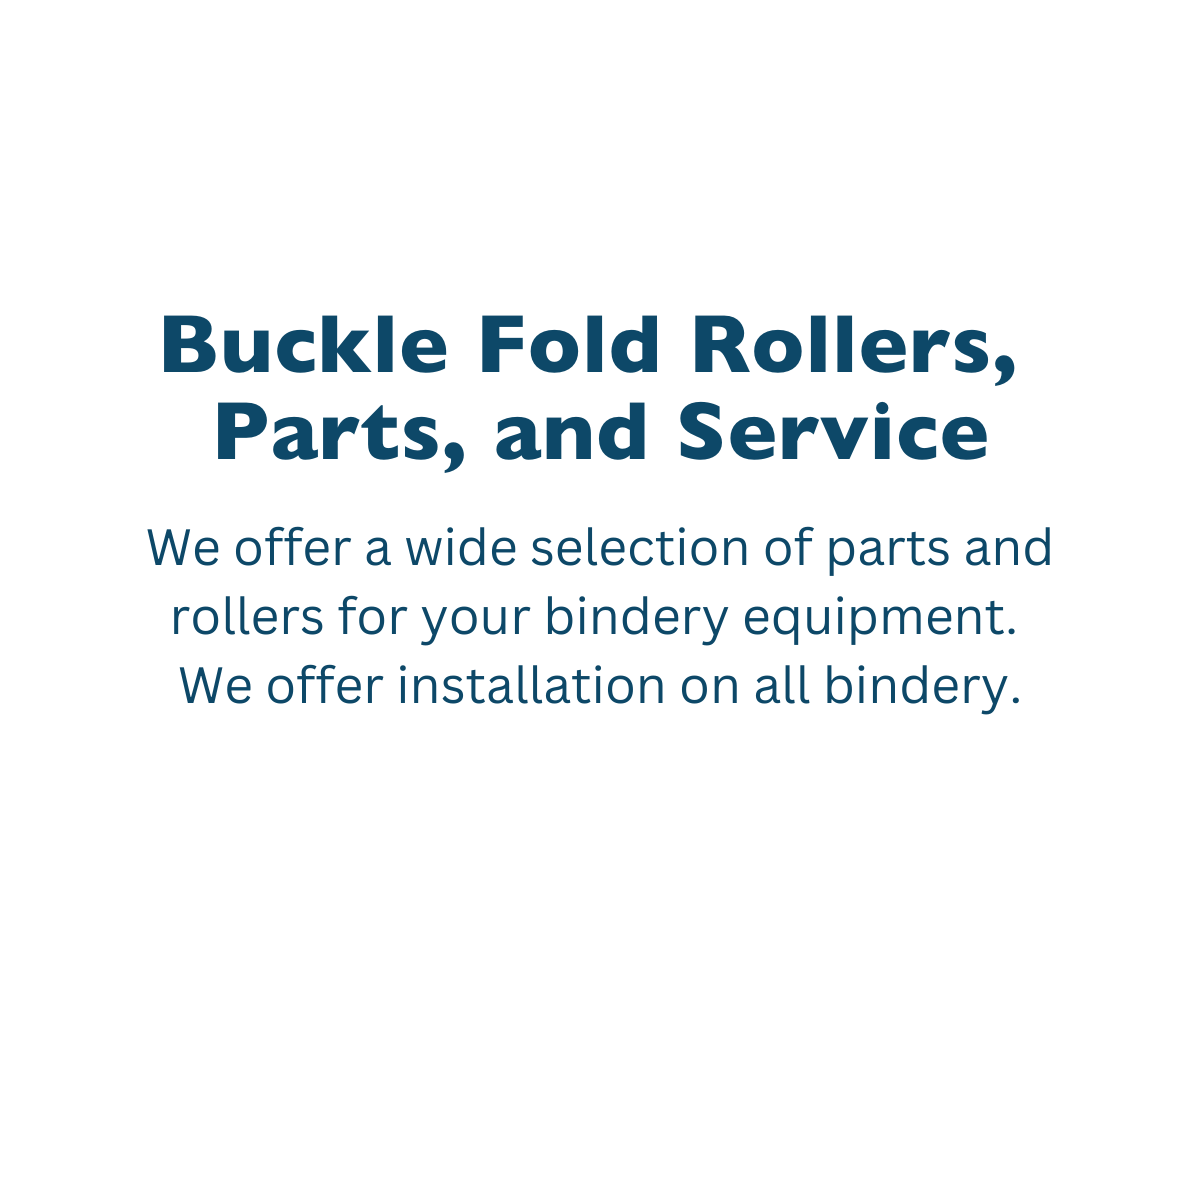 We offer a wide selection of parts and rollers for your bindery equipment.<br />
We offer installation on all bindery.